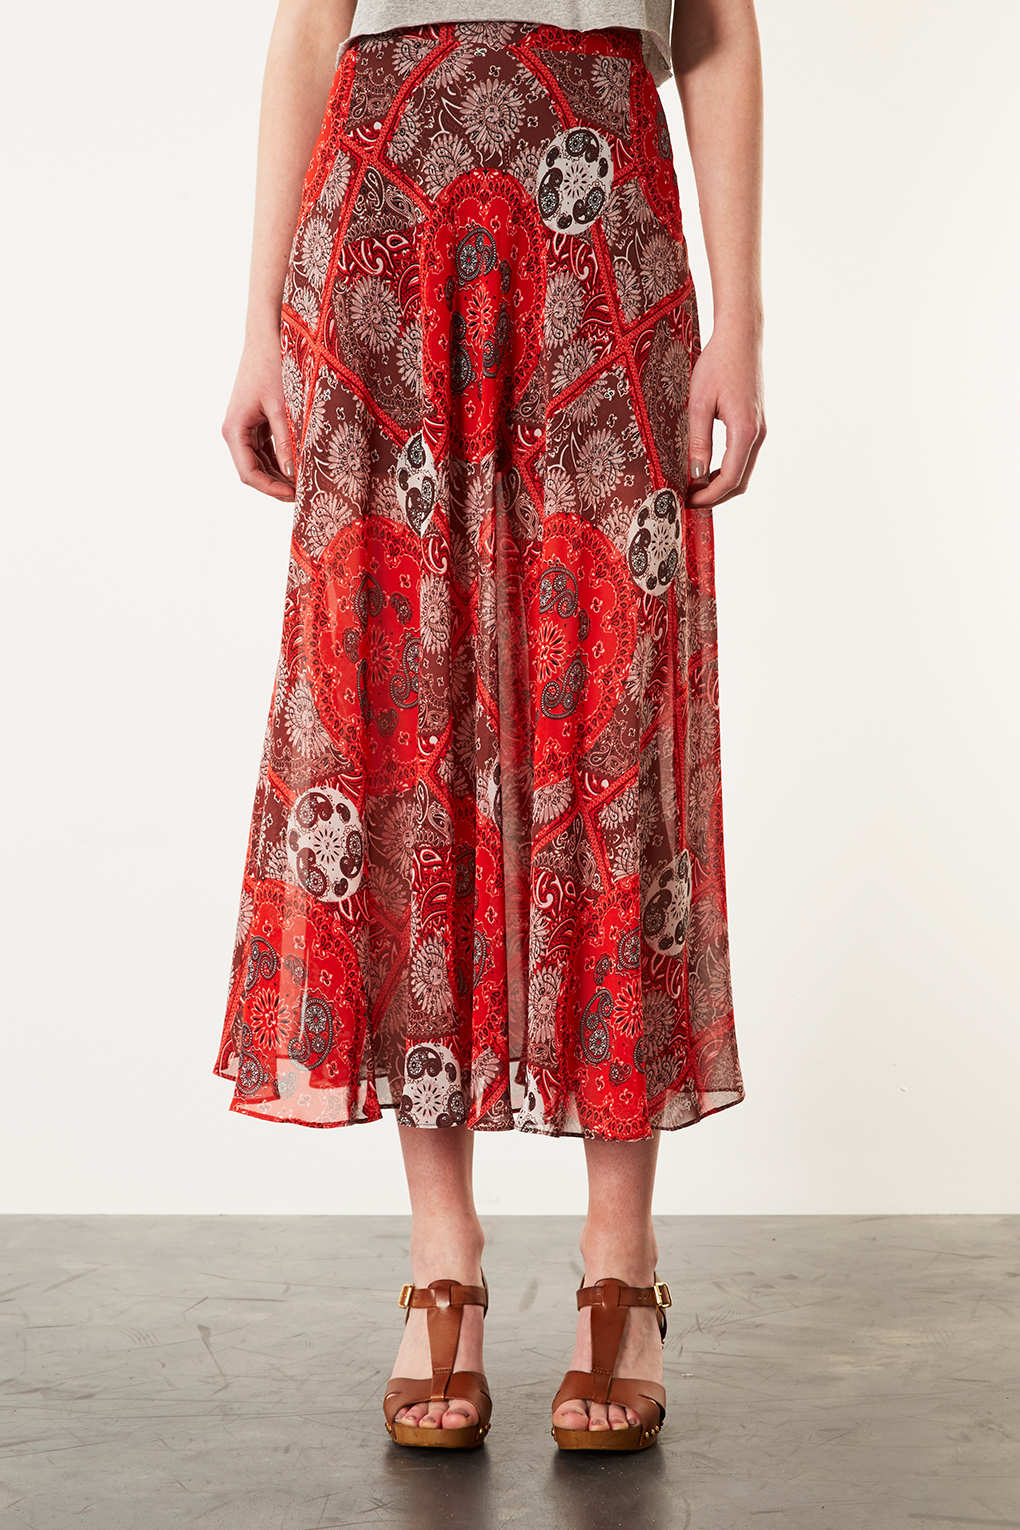 Lyst - TOPSHOP Red Bandana Print Maxi Skirt in Red